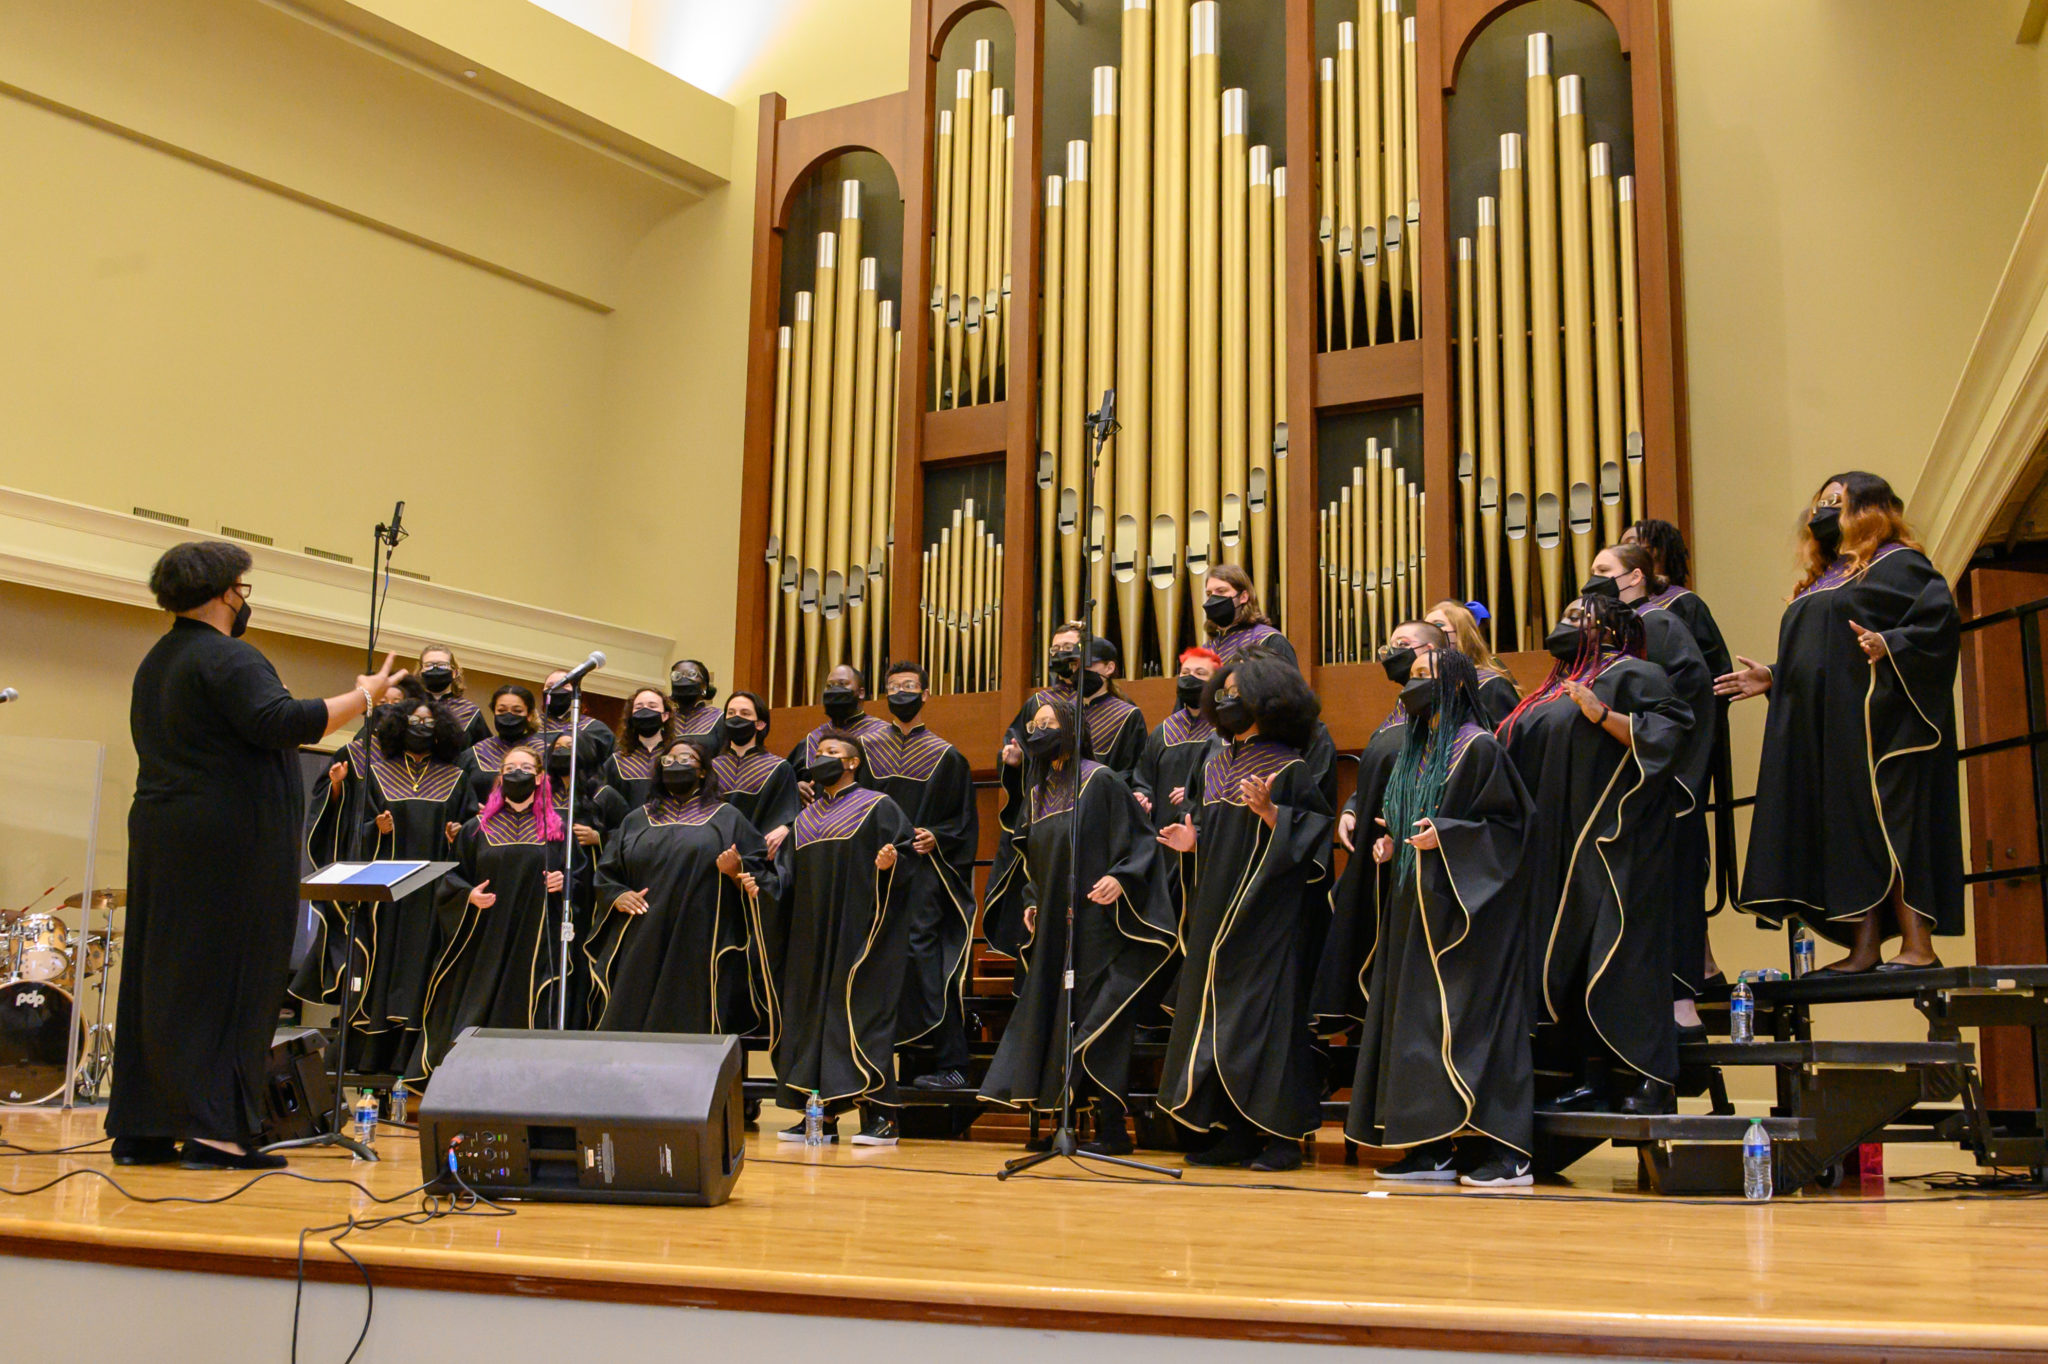 BME singing during a performance